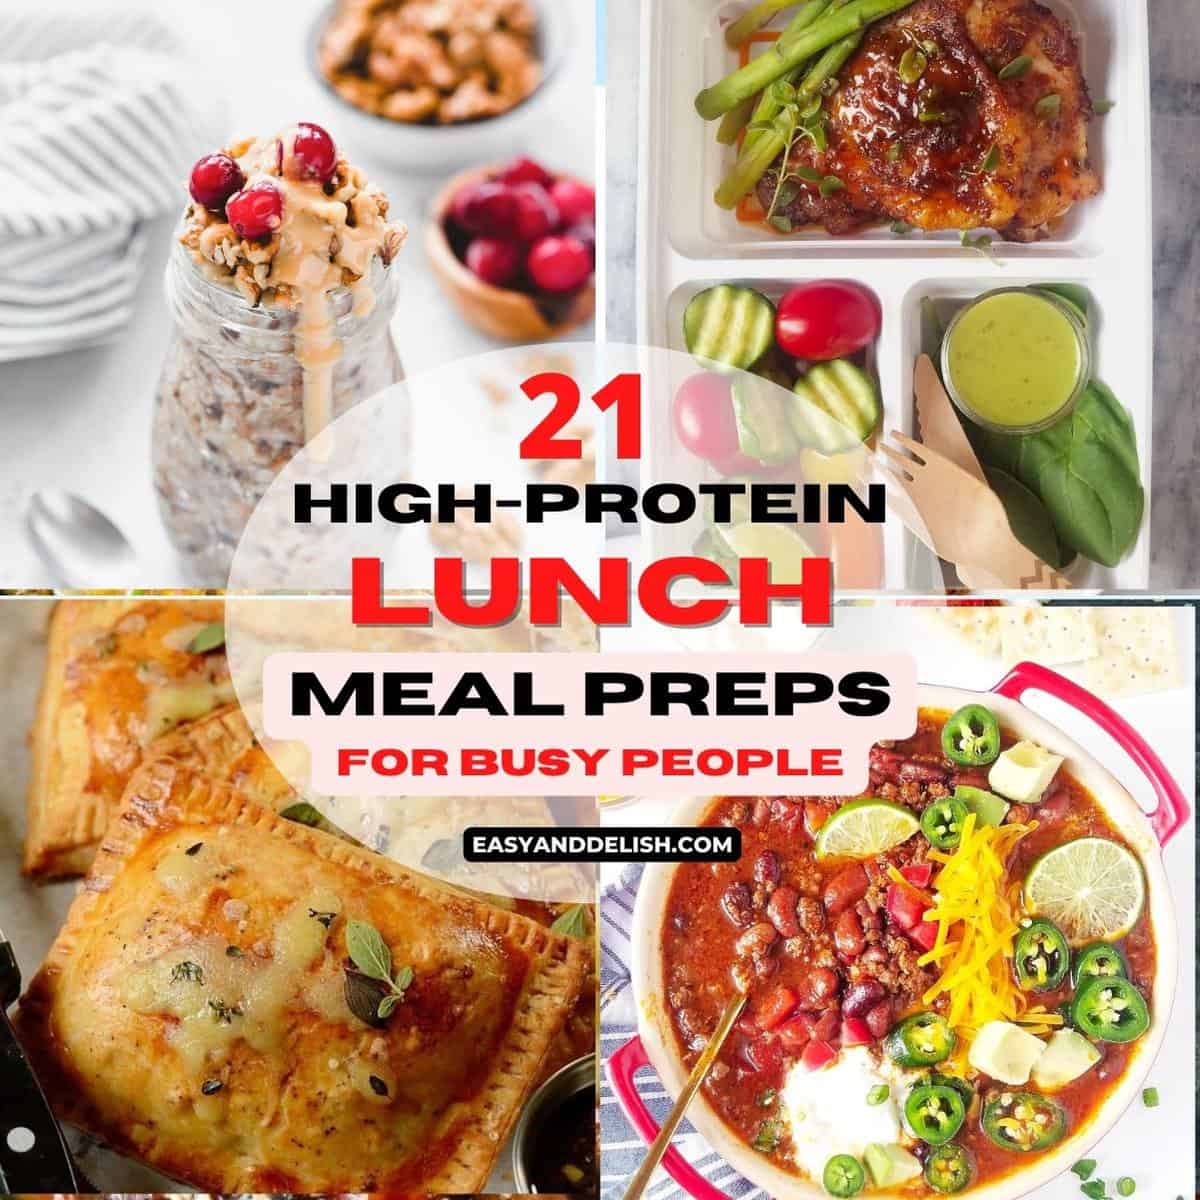 photo collage showing 4 out of 12 high-protein  meal preps for lunch